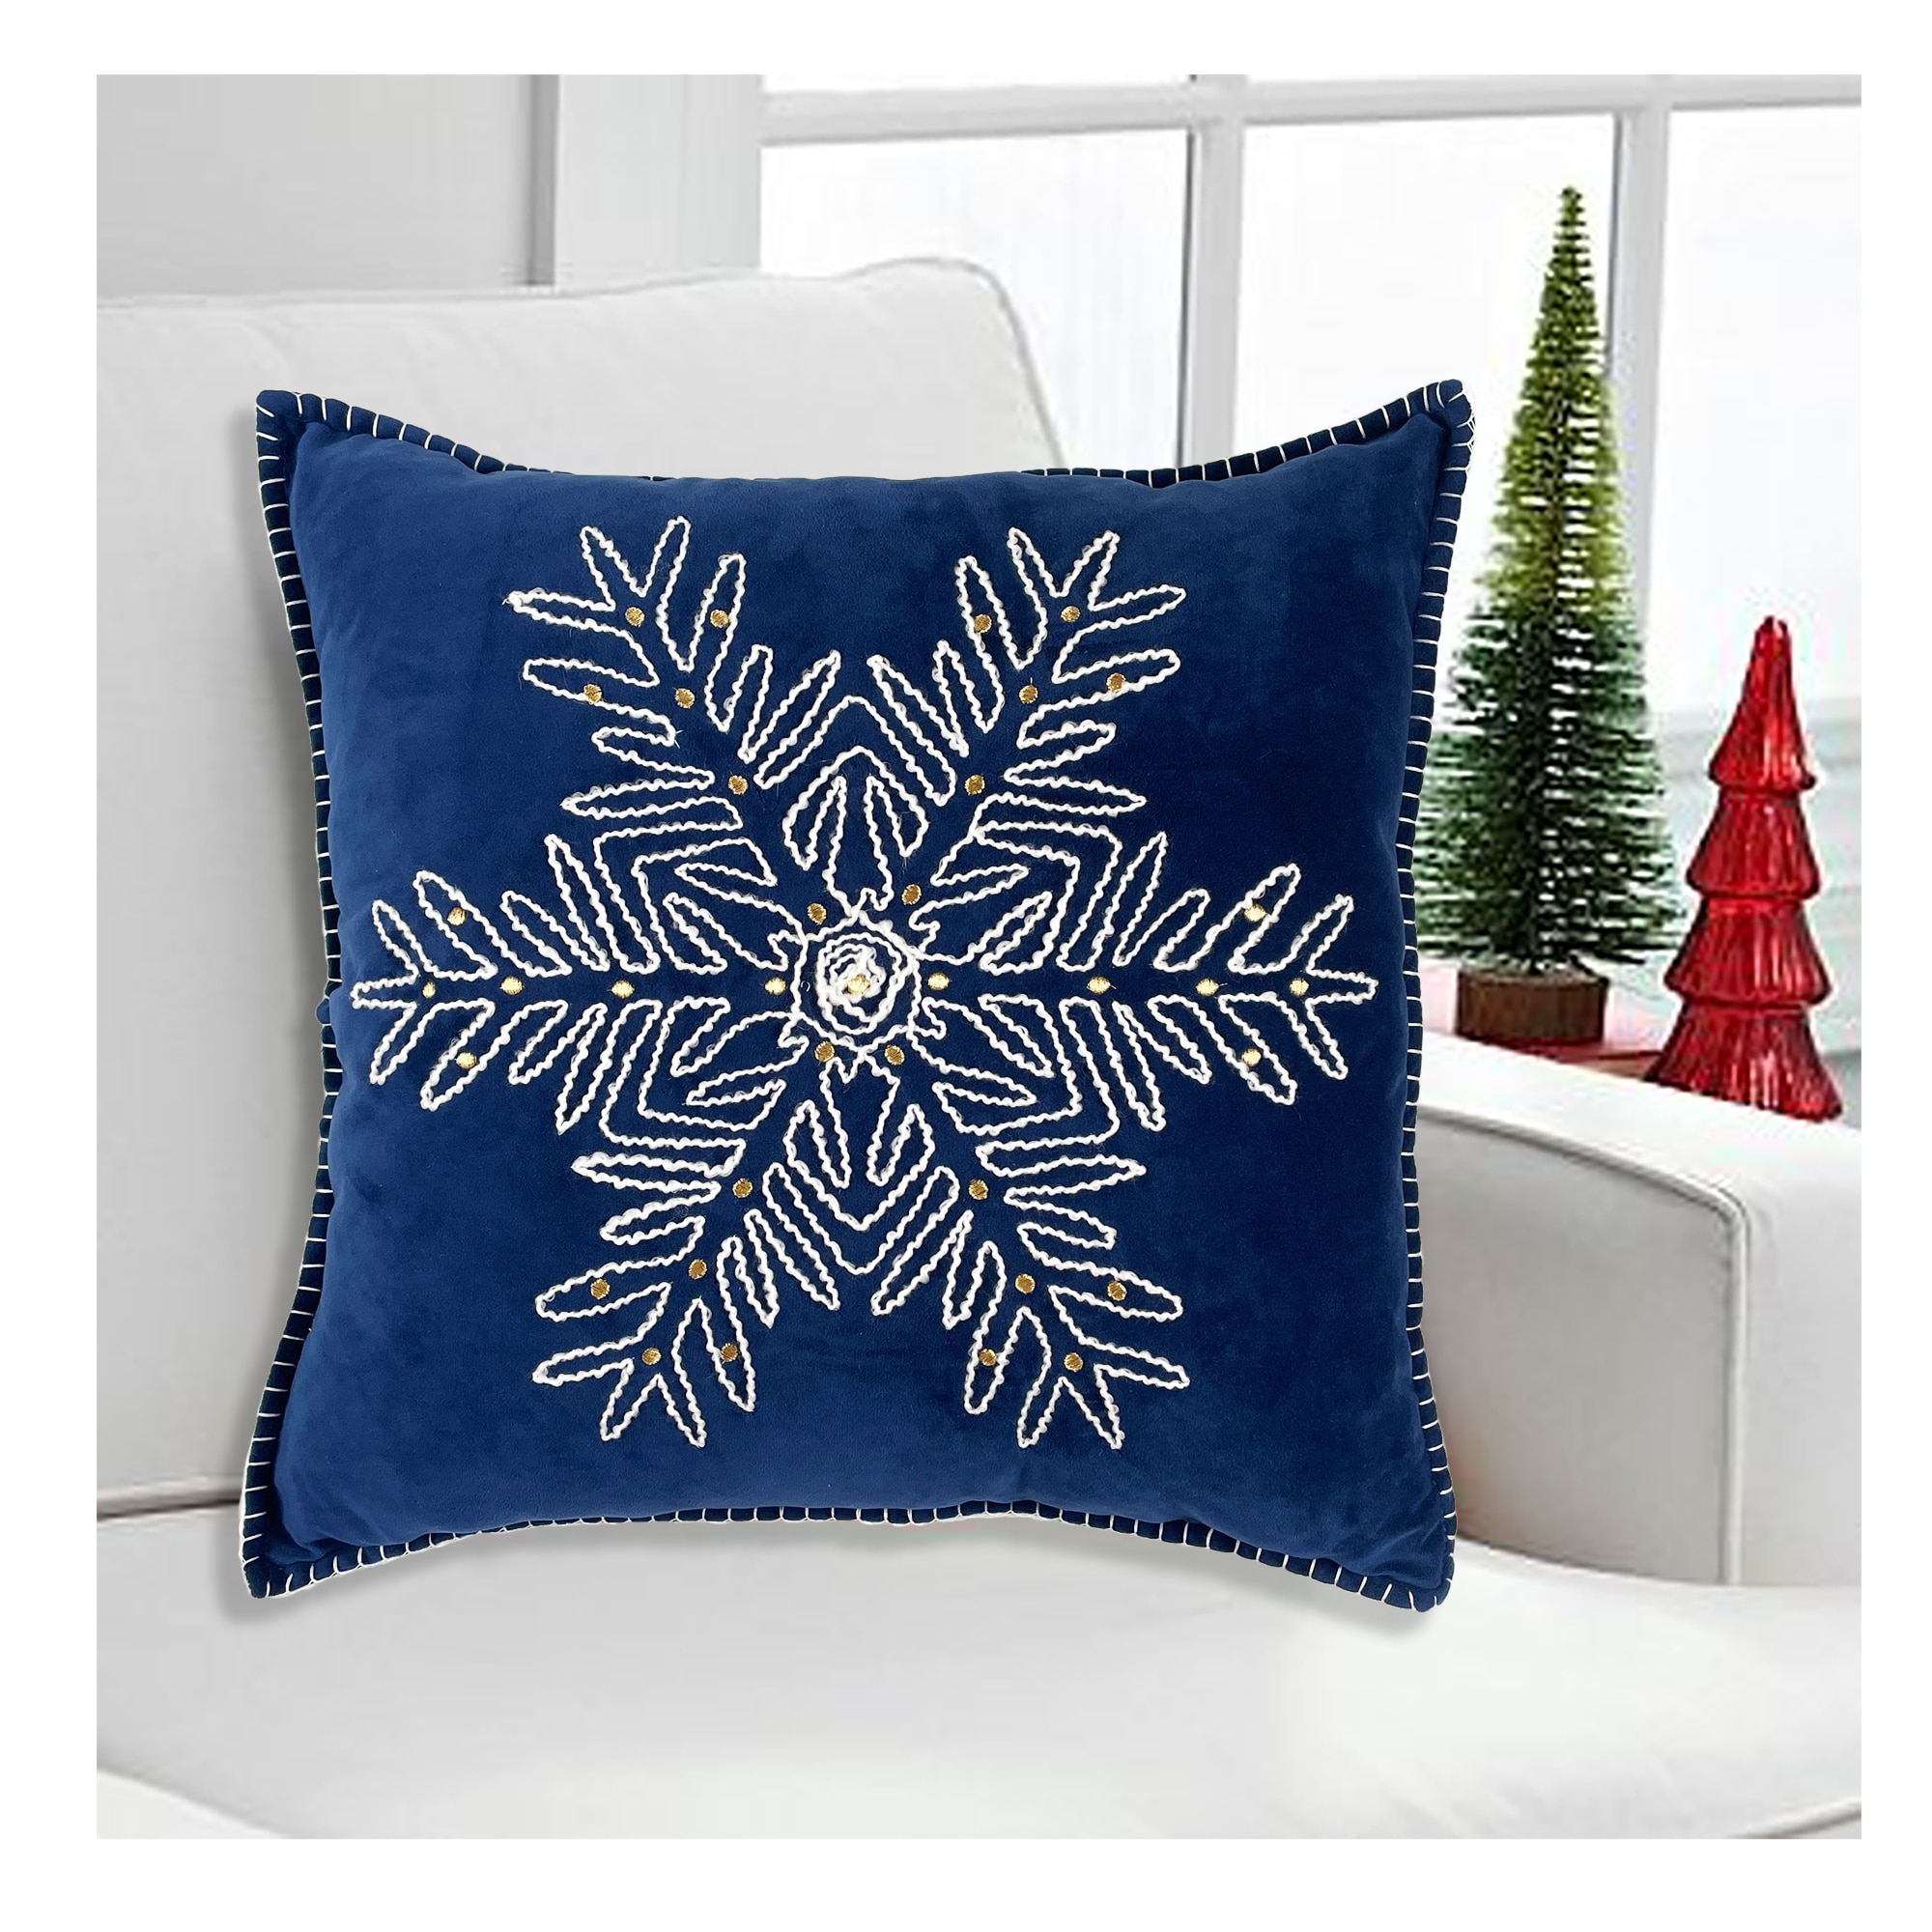 Christmas, Christmas Throw Pillows, Pillow Case Only NO Inserts/fall Decor,  Pool Decor, Couch Pillows 